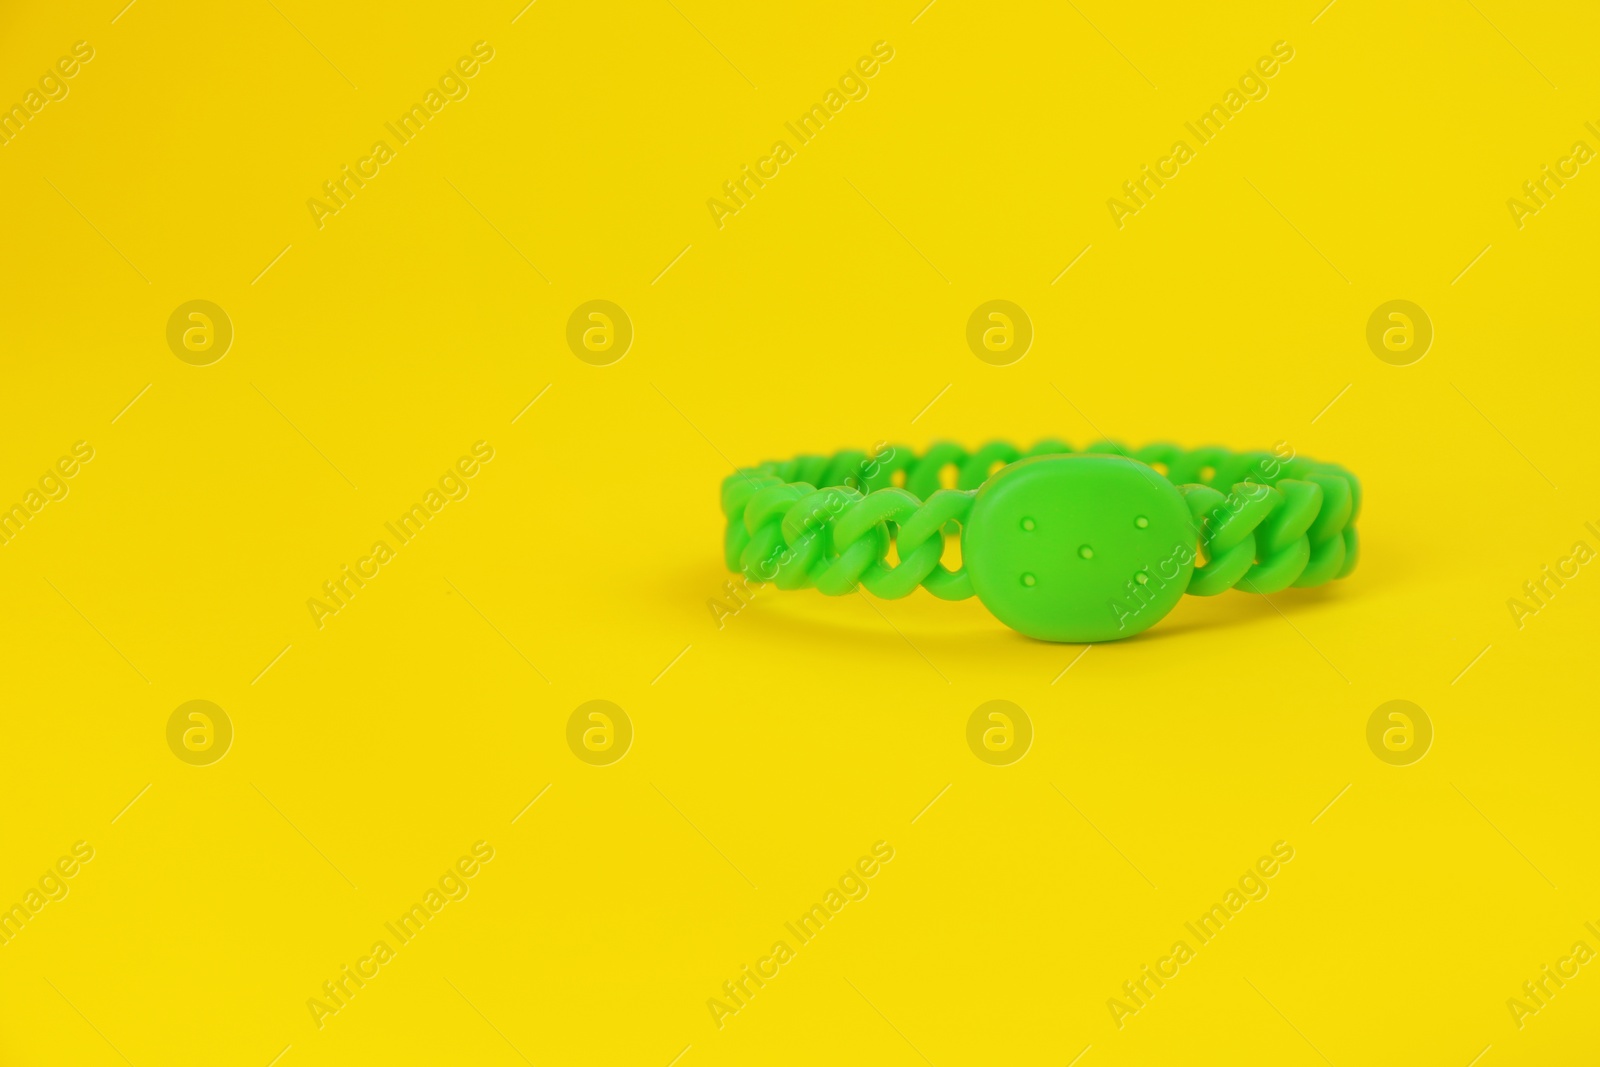 Photo of Insect repellent wrist band on yellow background, space for text